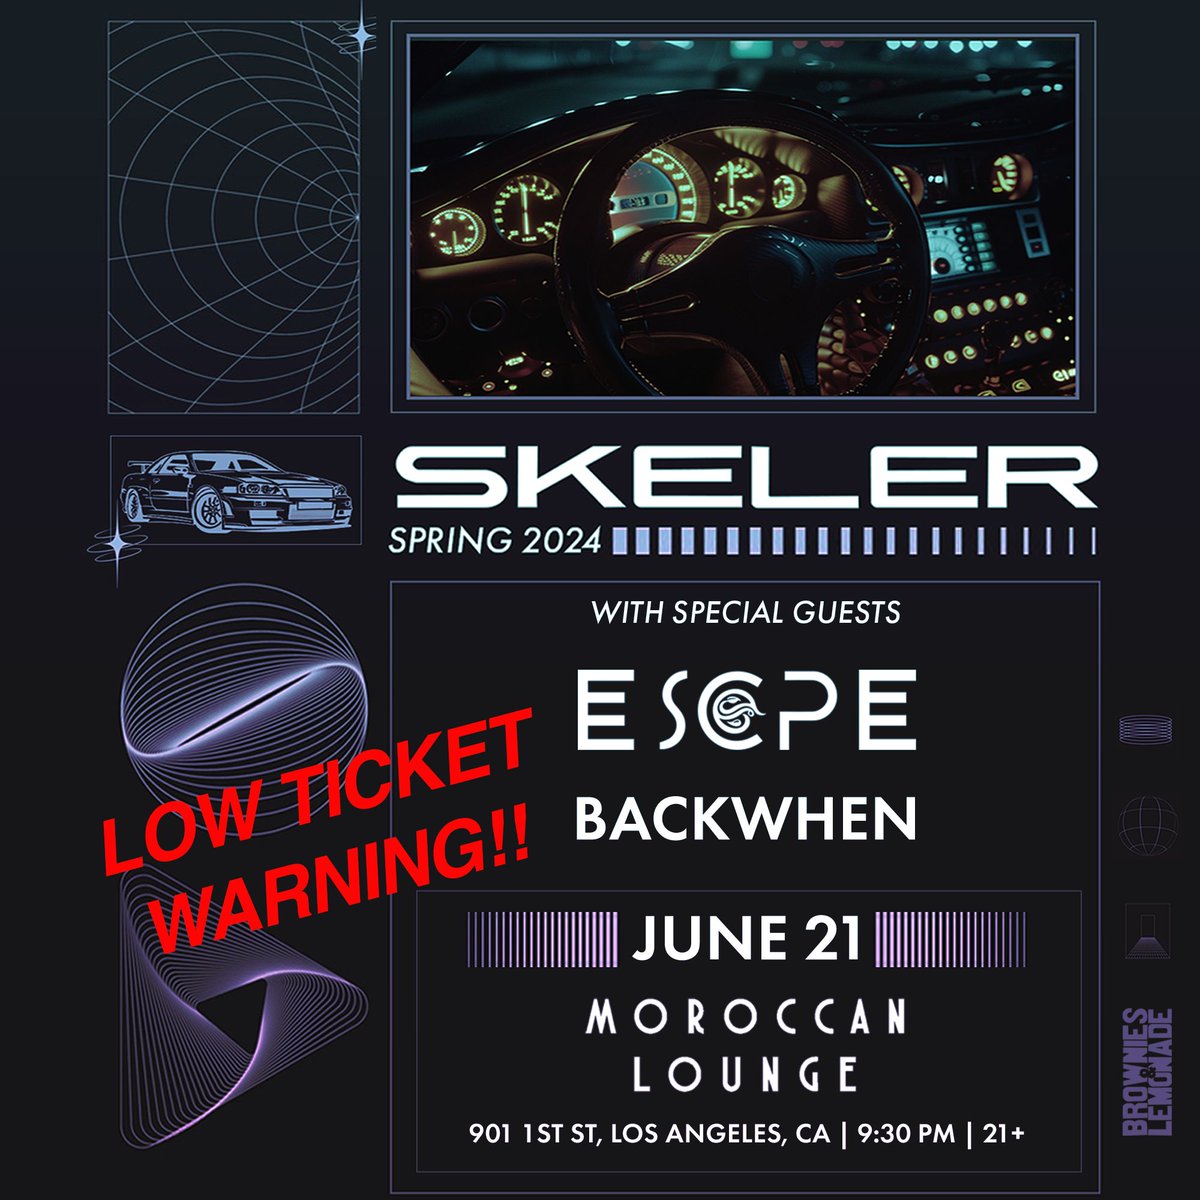 🚨 Don't miss out on your chance to see Skeler June 21st with special guest ESCPE & Backwhen! 💿 We're running low on tickets! 🎟️ So get your now, before they're gone! #Skeler #ESCPE #BackWhen #Moroccan Lounge